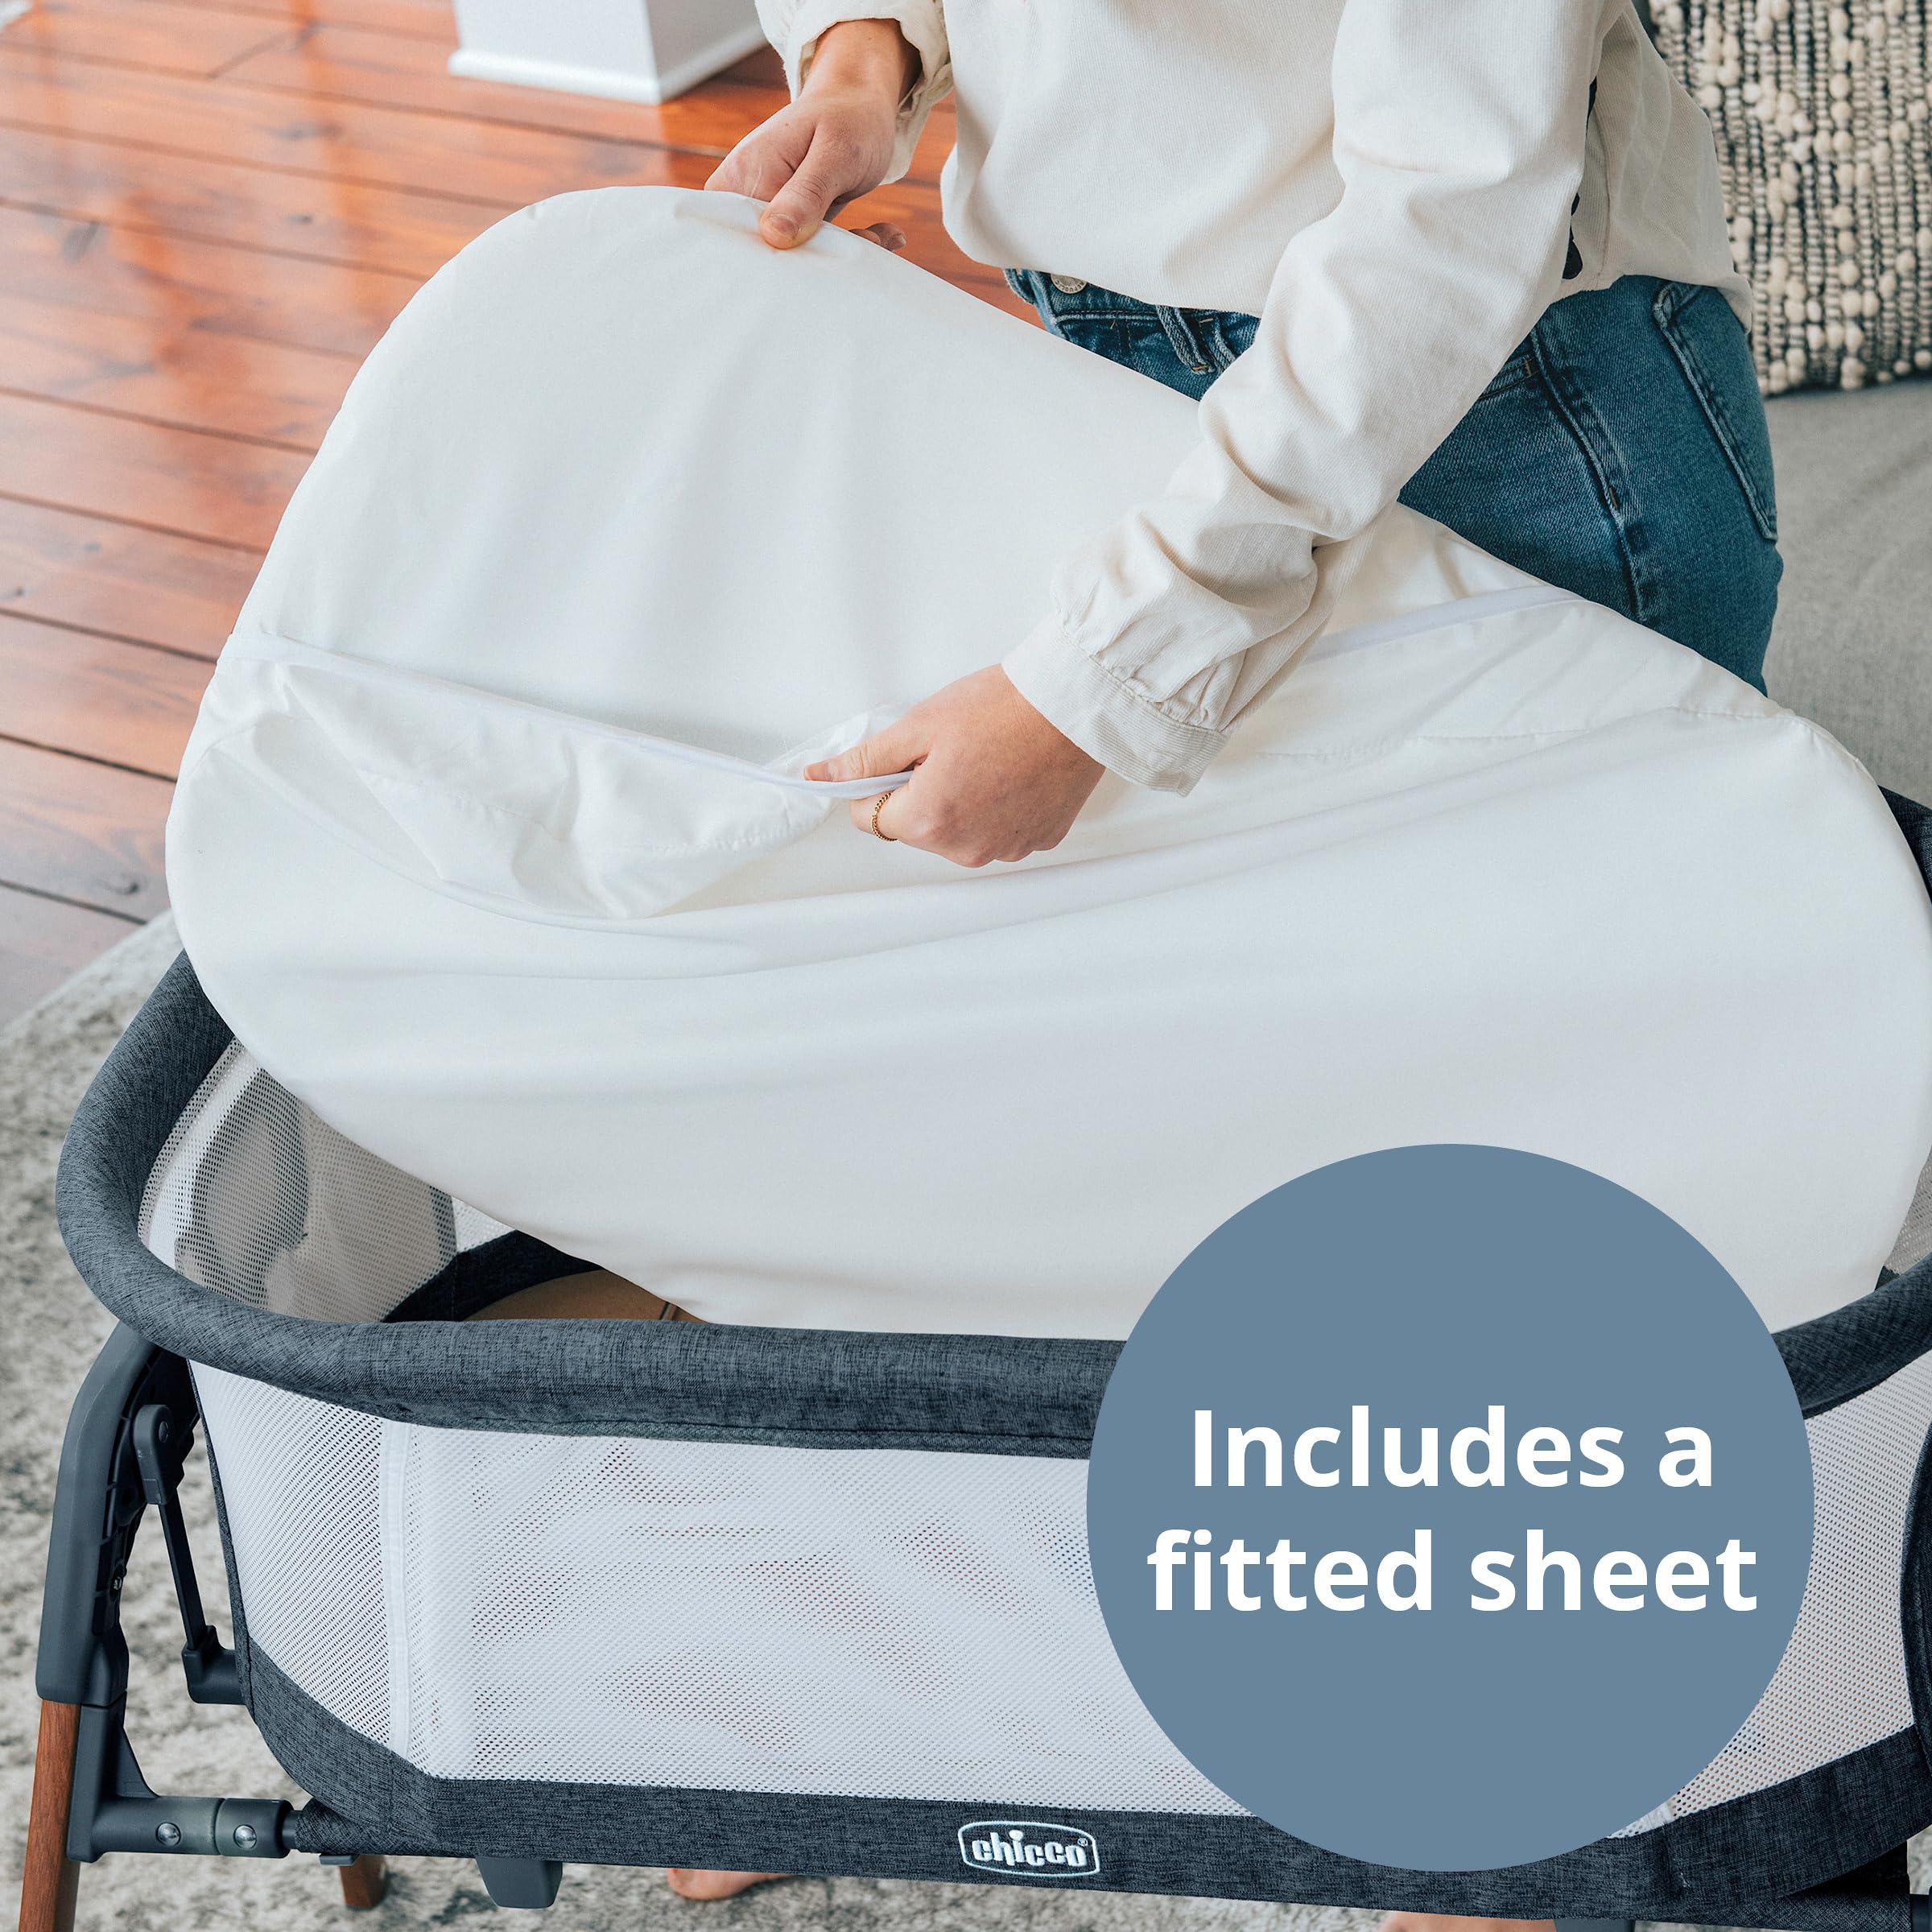 Chicco LullaGlide™ 3-in-1 Stationary Baby Bassinet, Gliding Bassinet and Portable Bassinet, Waterproof Mattress and Fitted Sheet, Travel Bassinet for Baby Includes Carry Bag | Luna/Grey